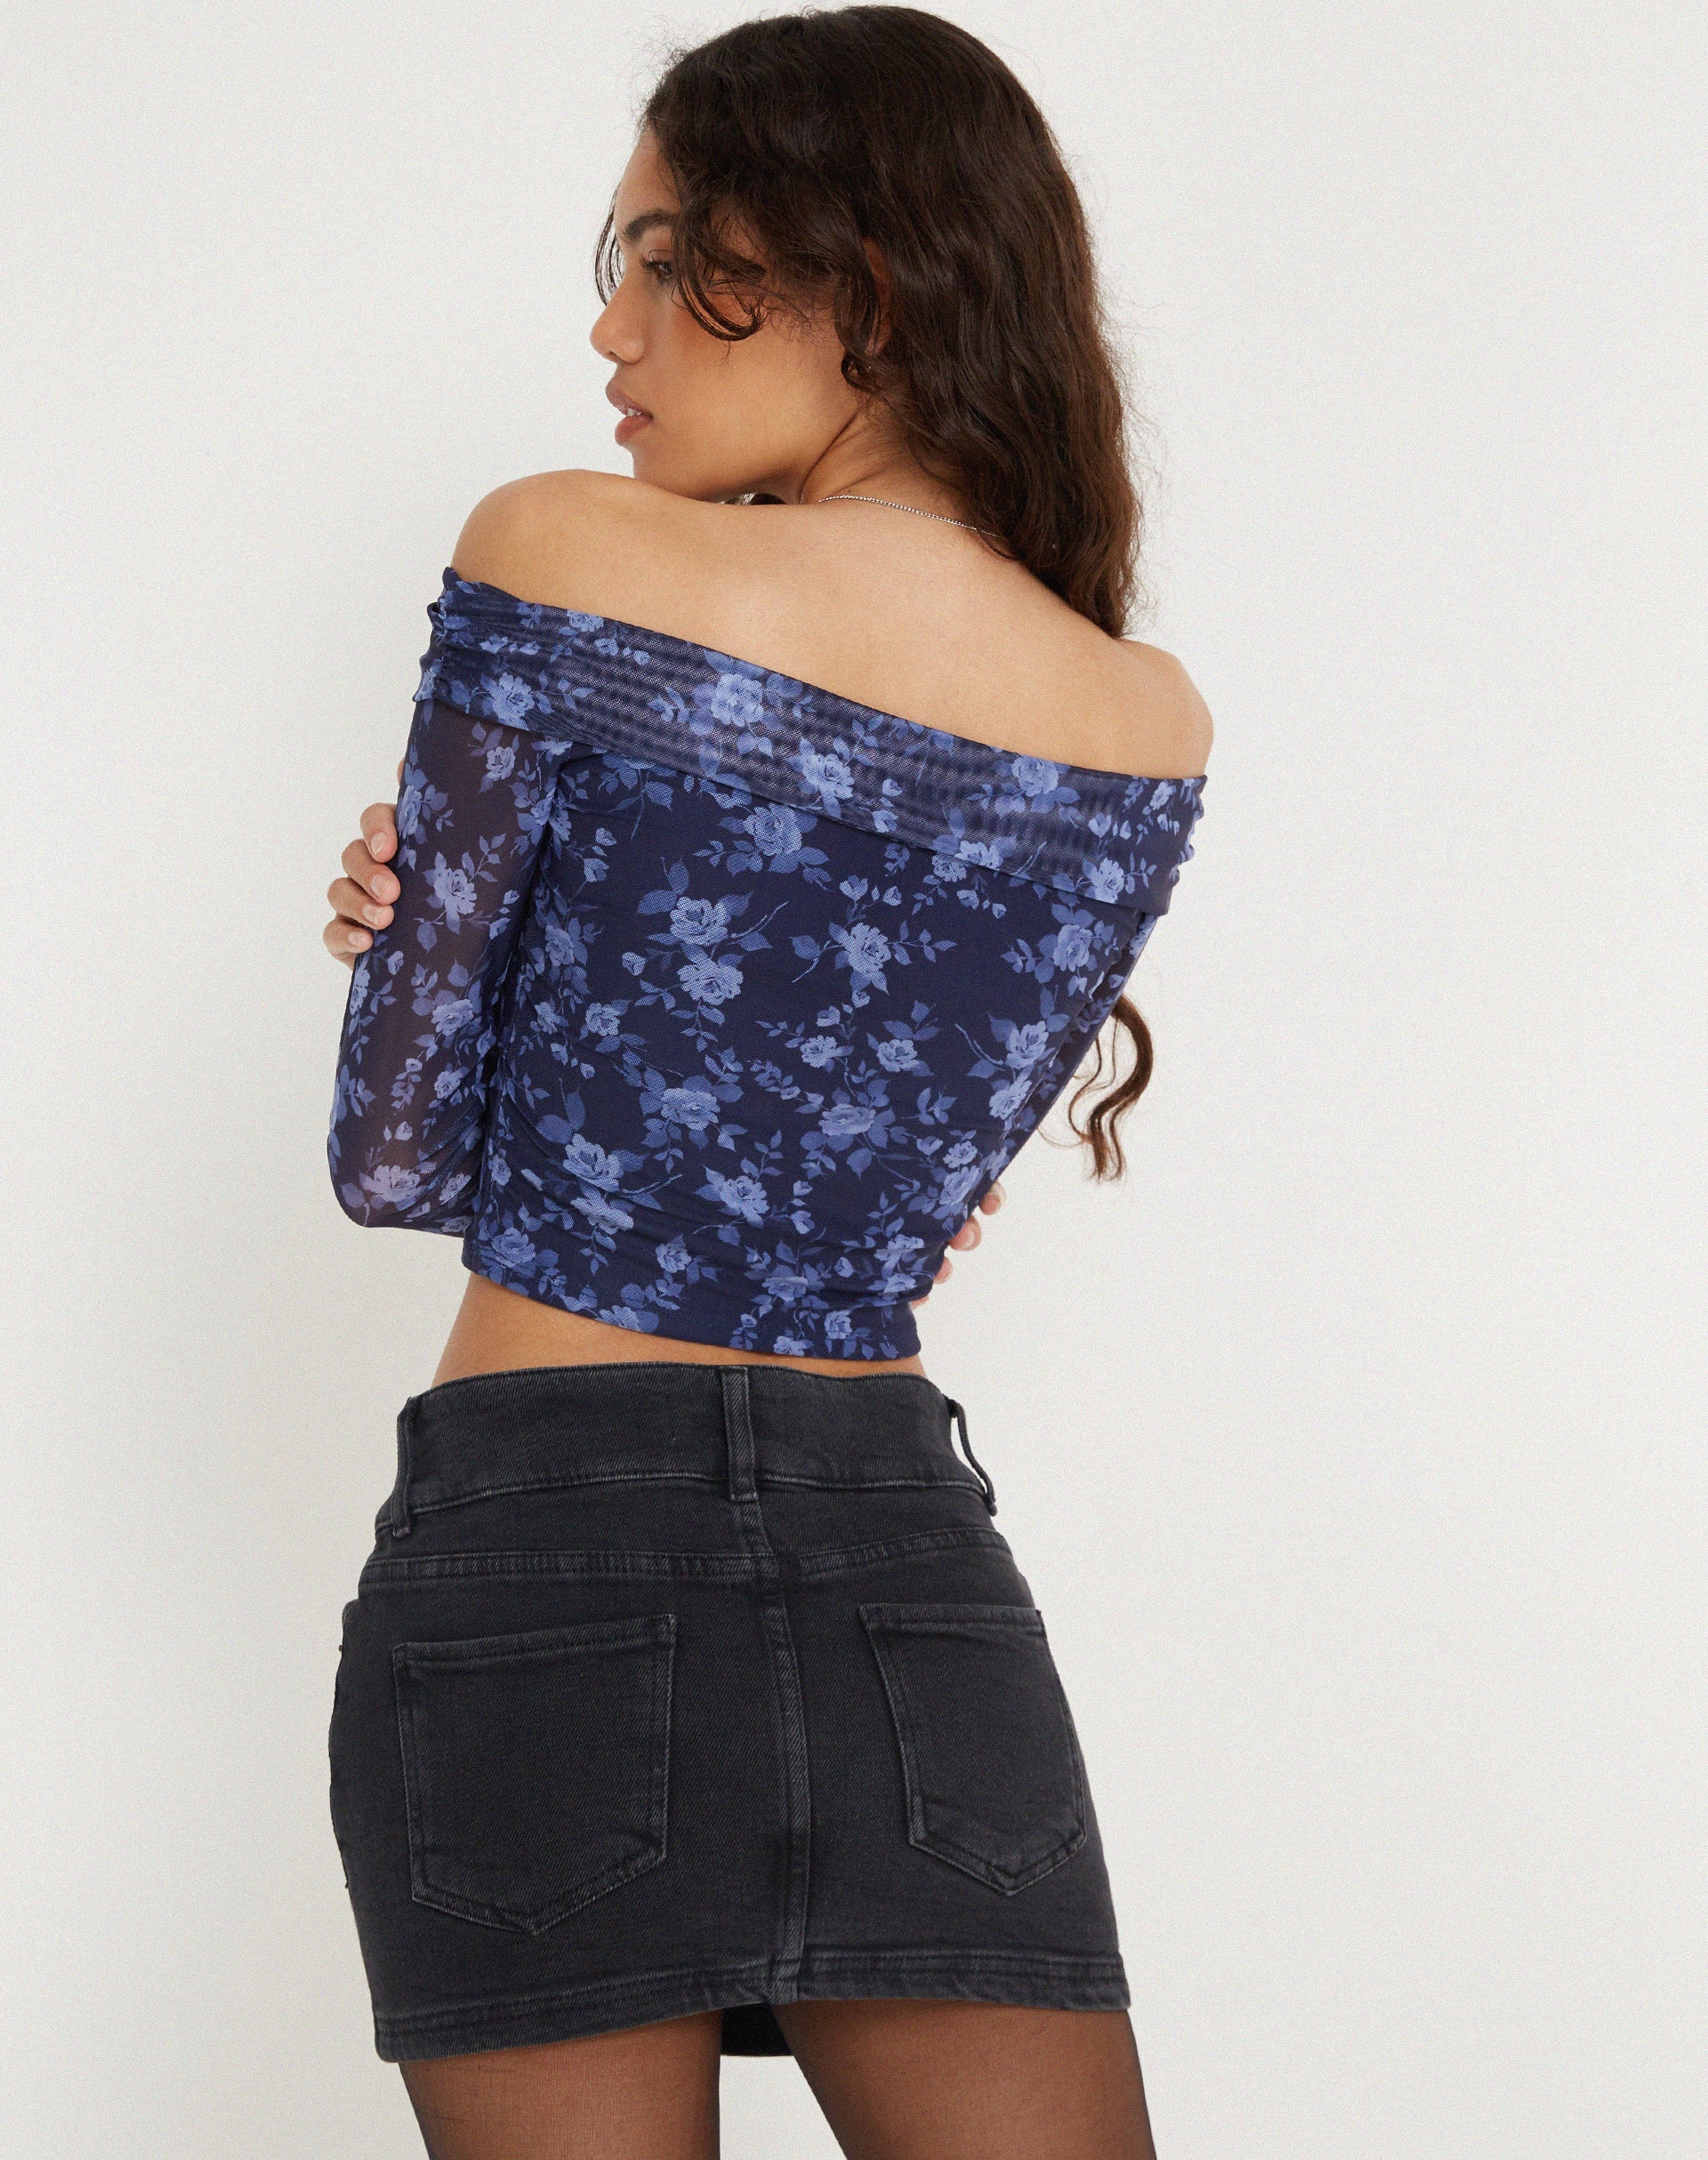 image of Nagini Long Sleeve Bardot Top in Pretty Floral Navy